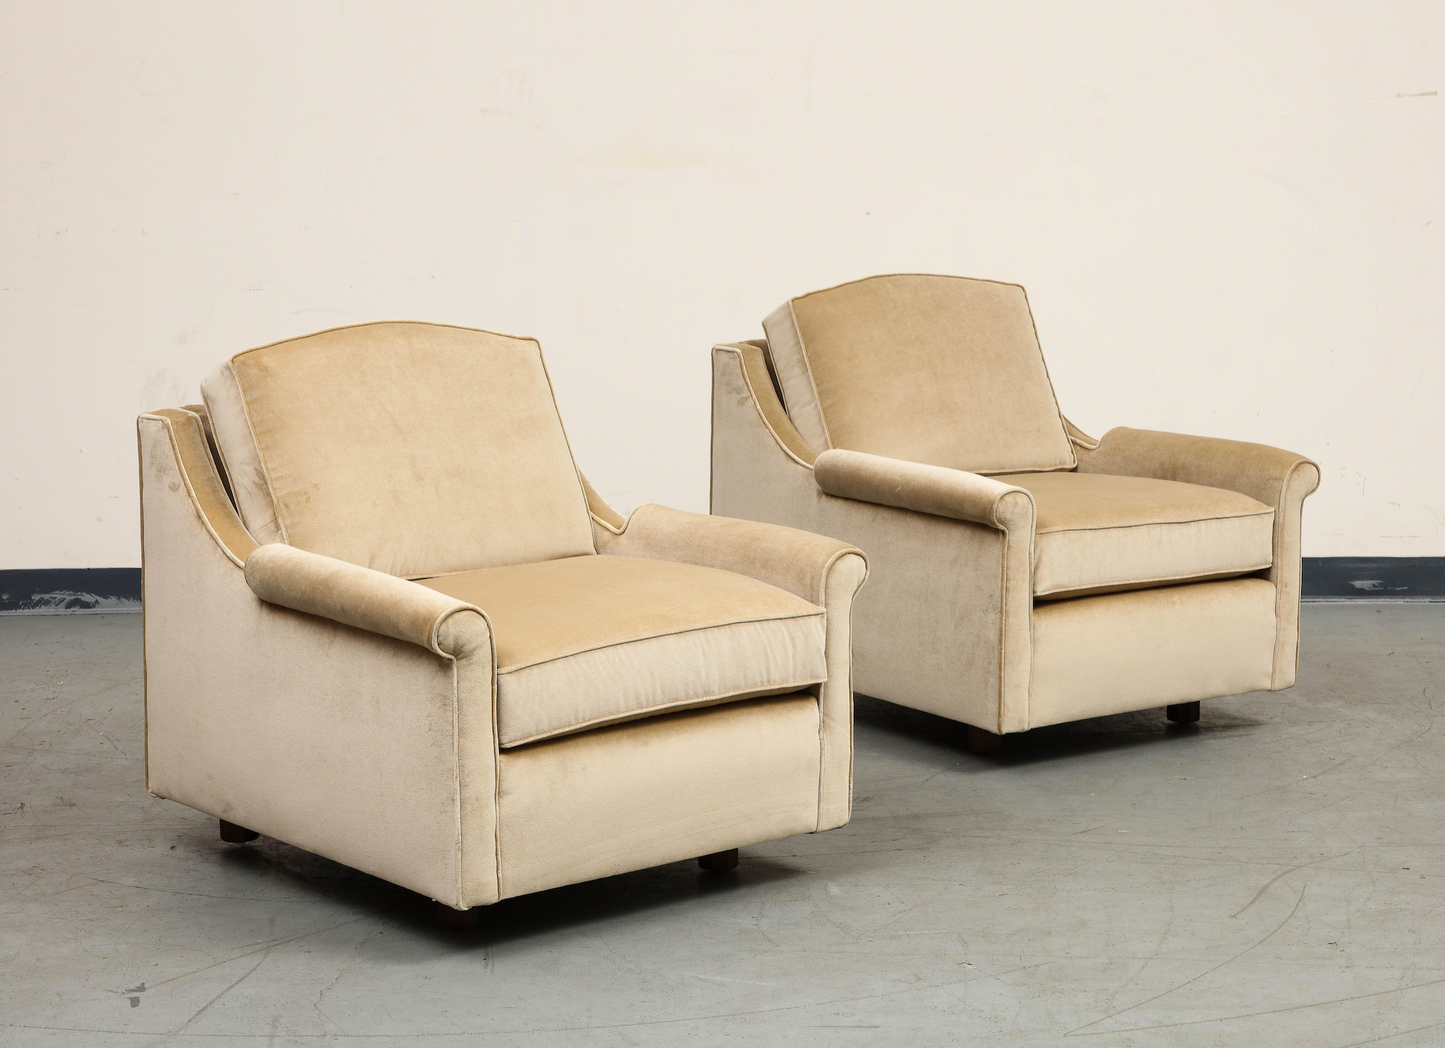 Pair of 1940s Tan Velvet Club Chairs, Newly Upholstered